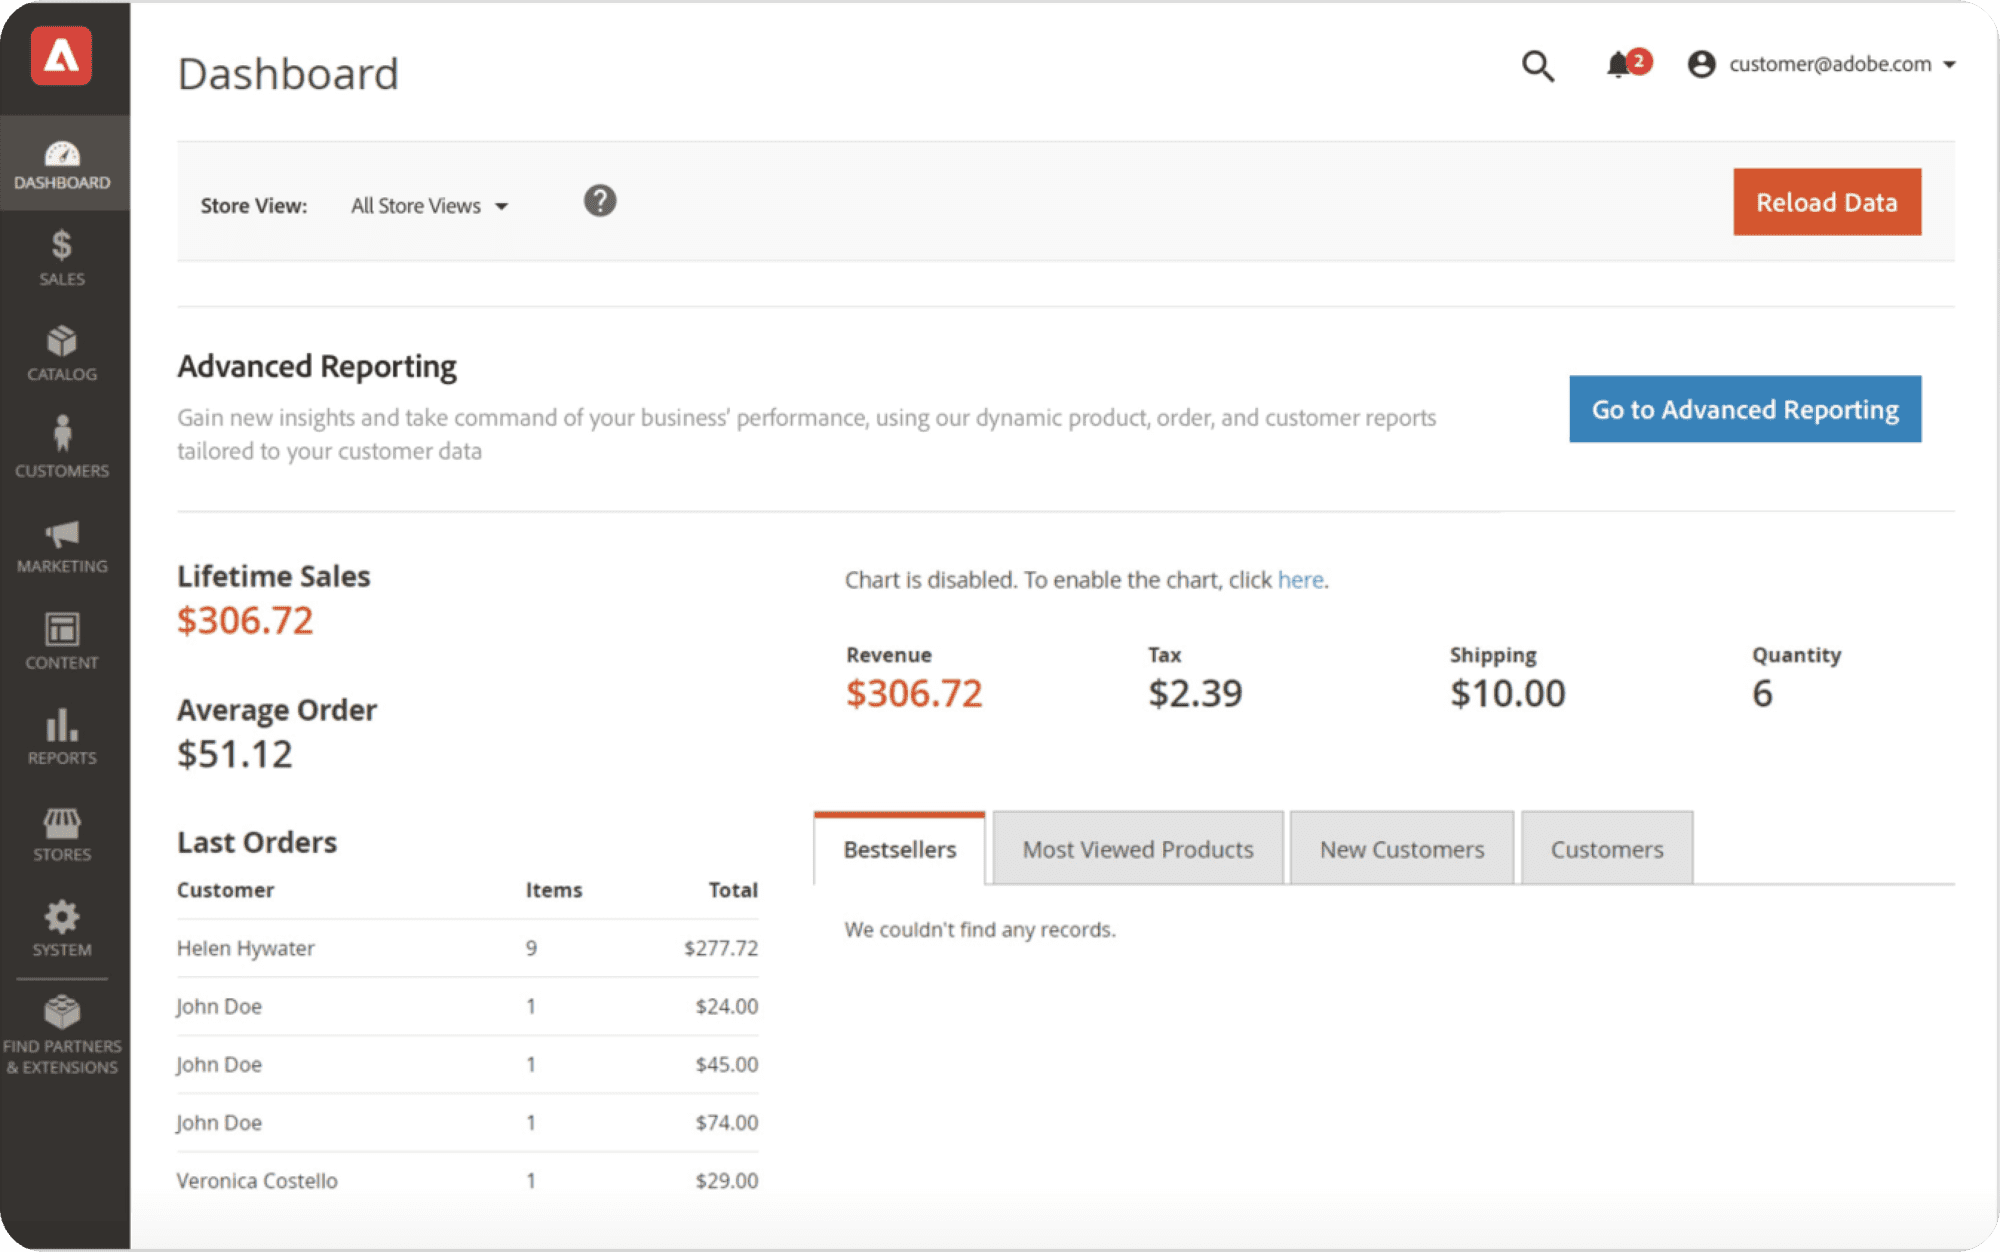 Magento Dashboard for eCommerce to help users easily manage their stores